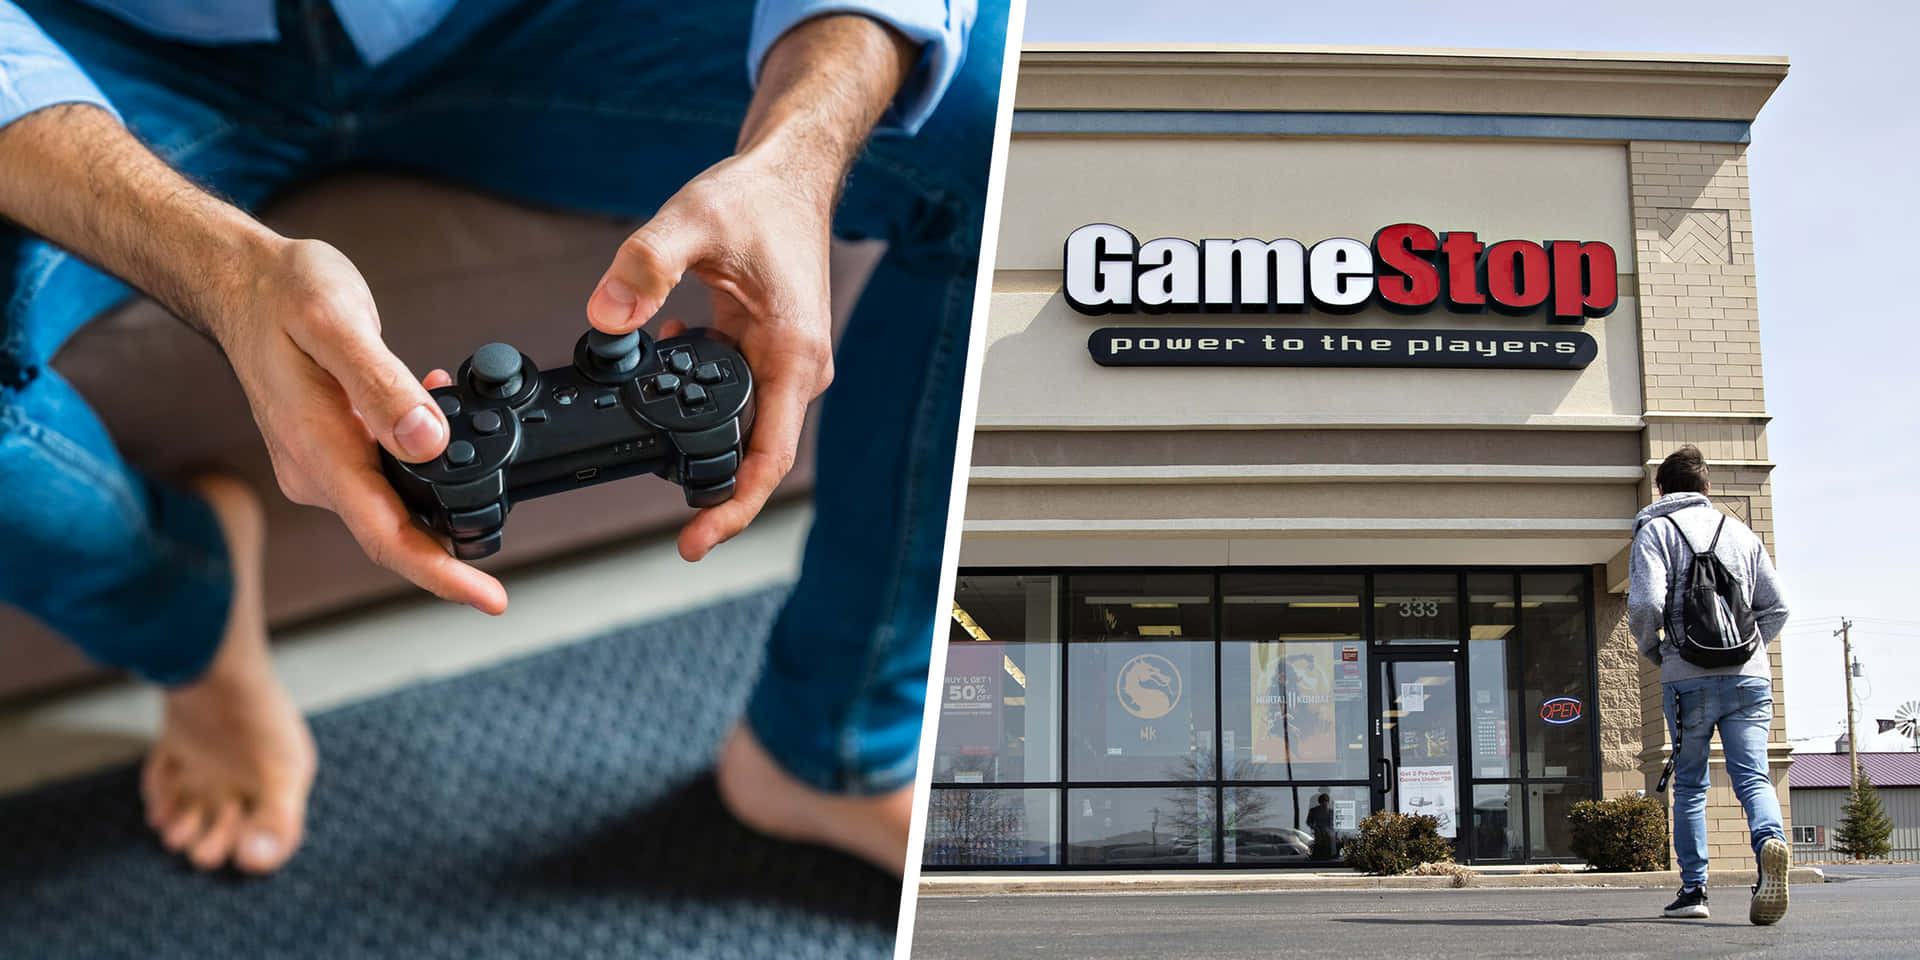 "The latest gaming products are at Gamestop!"